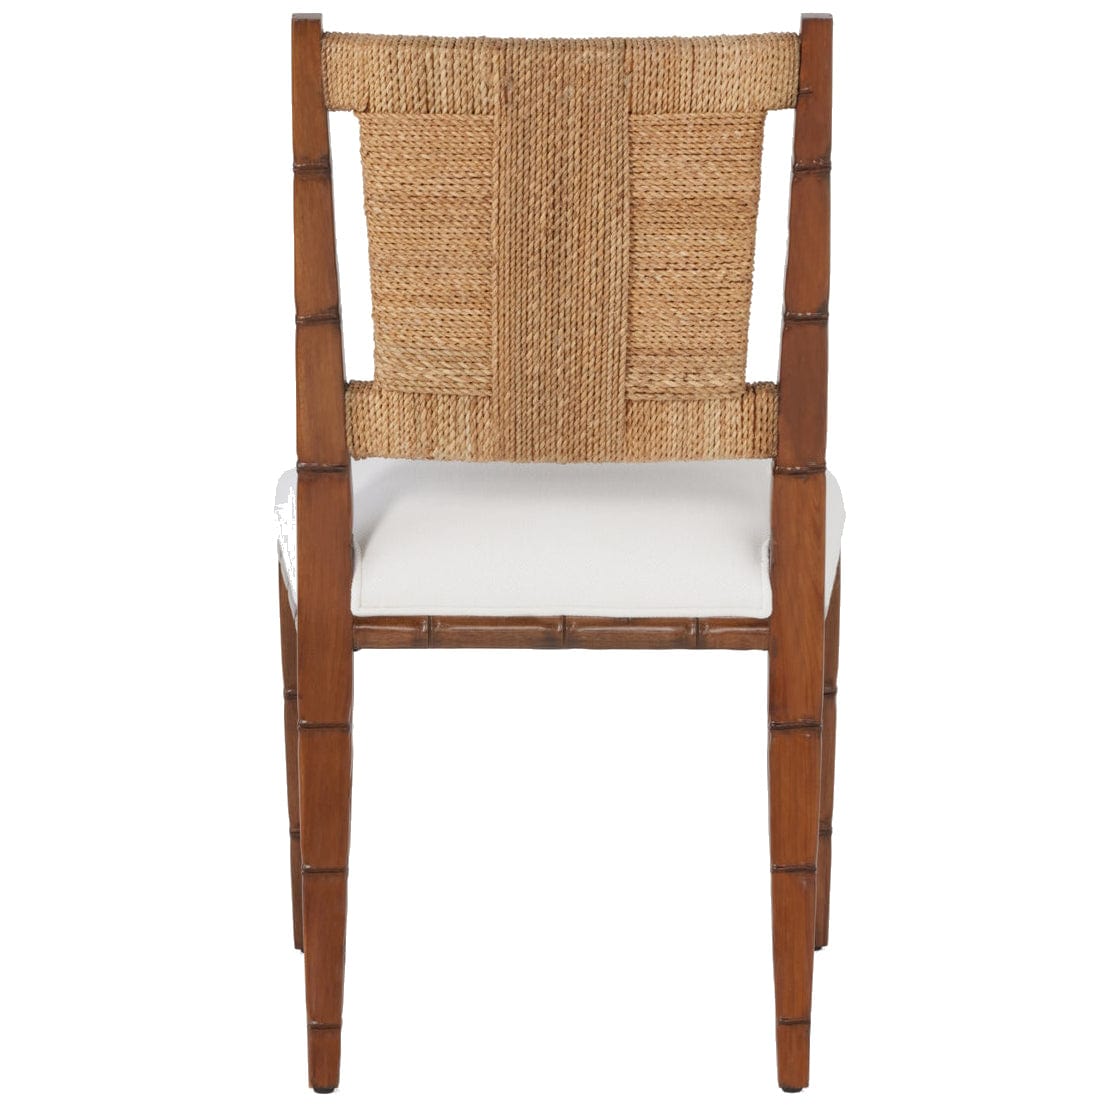 Made Goods Kiera Dining Chair Upholstered Dining Chair made-goods-FURKIERANTRPAL-WH